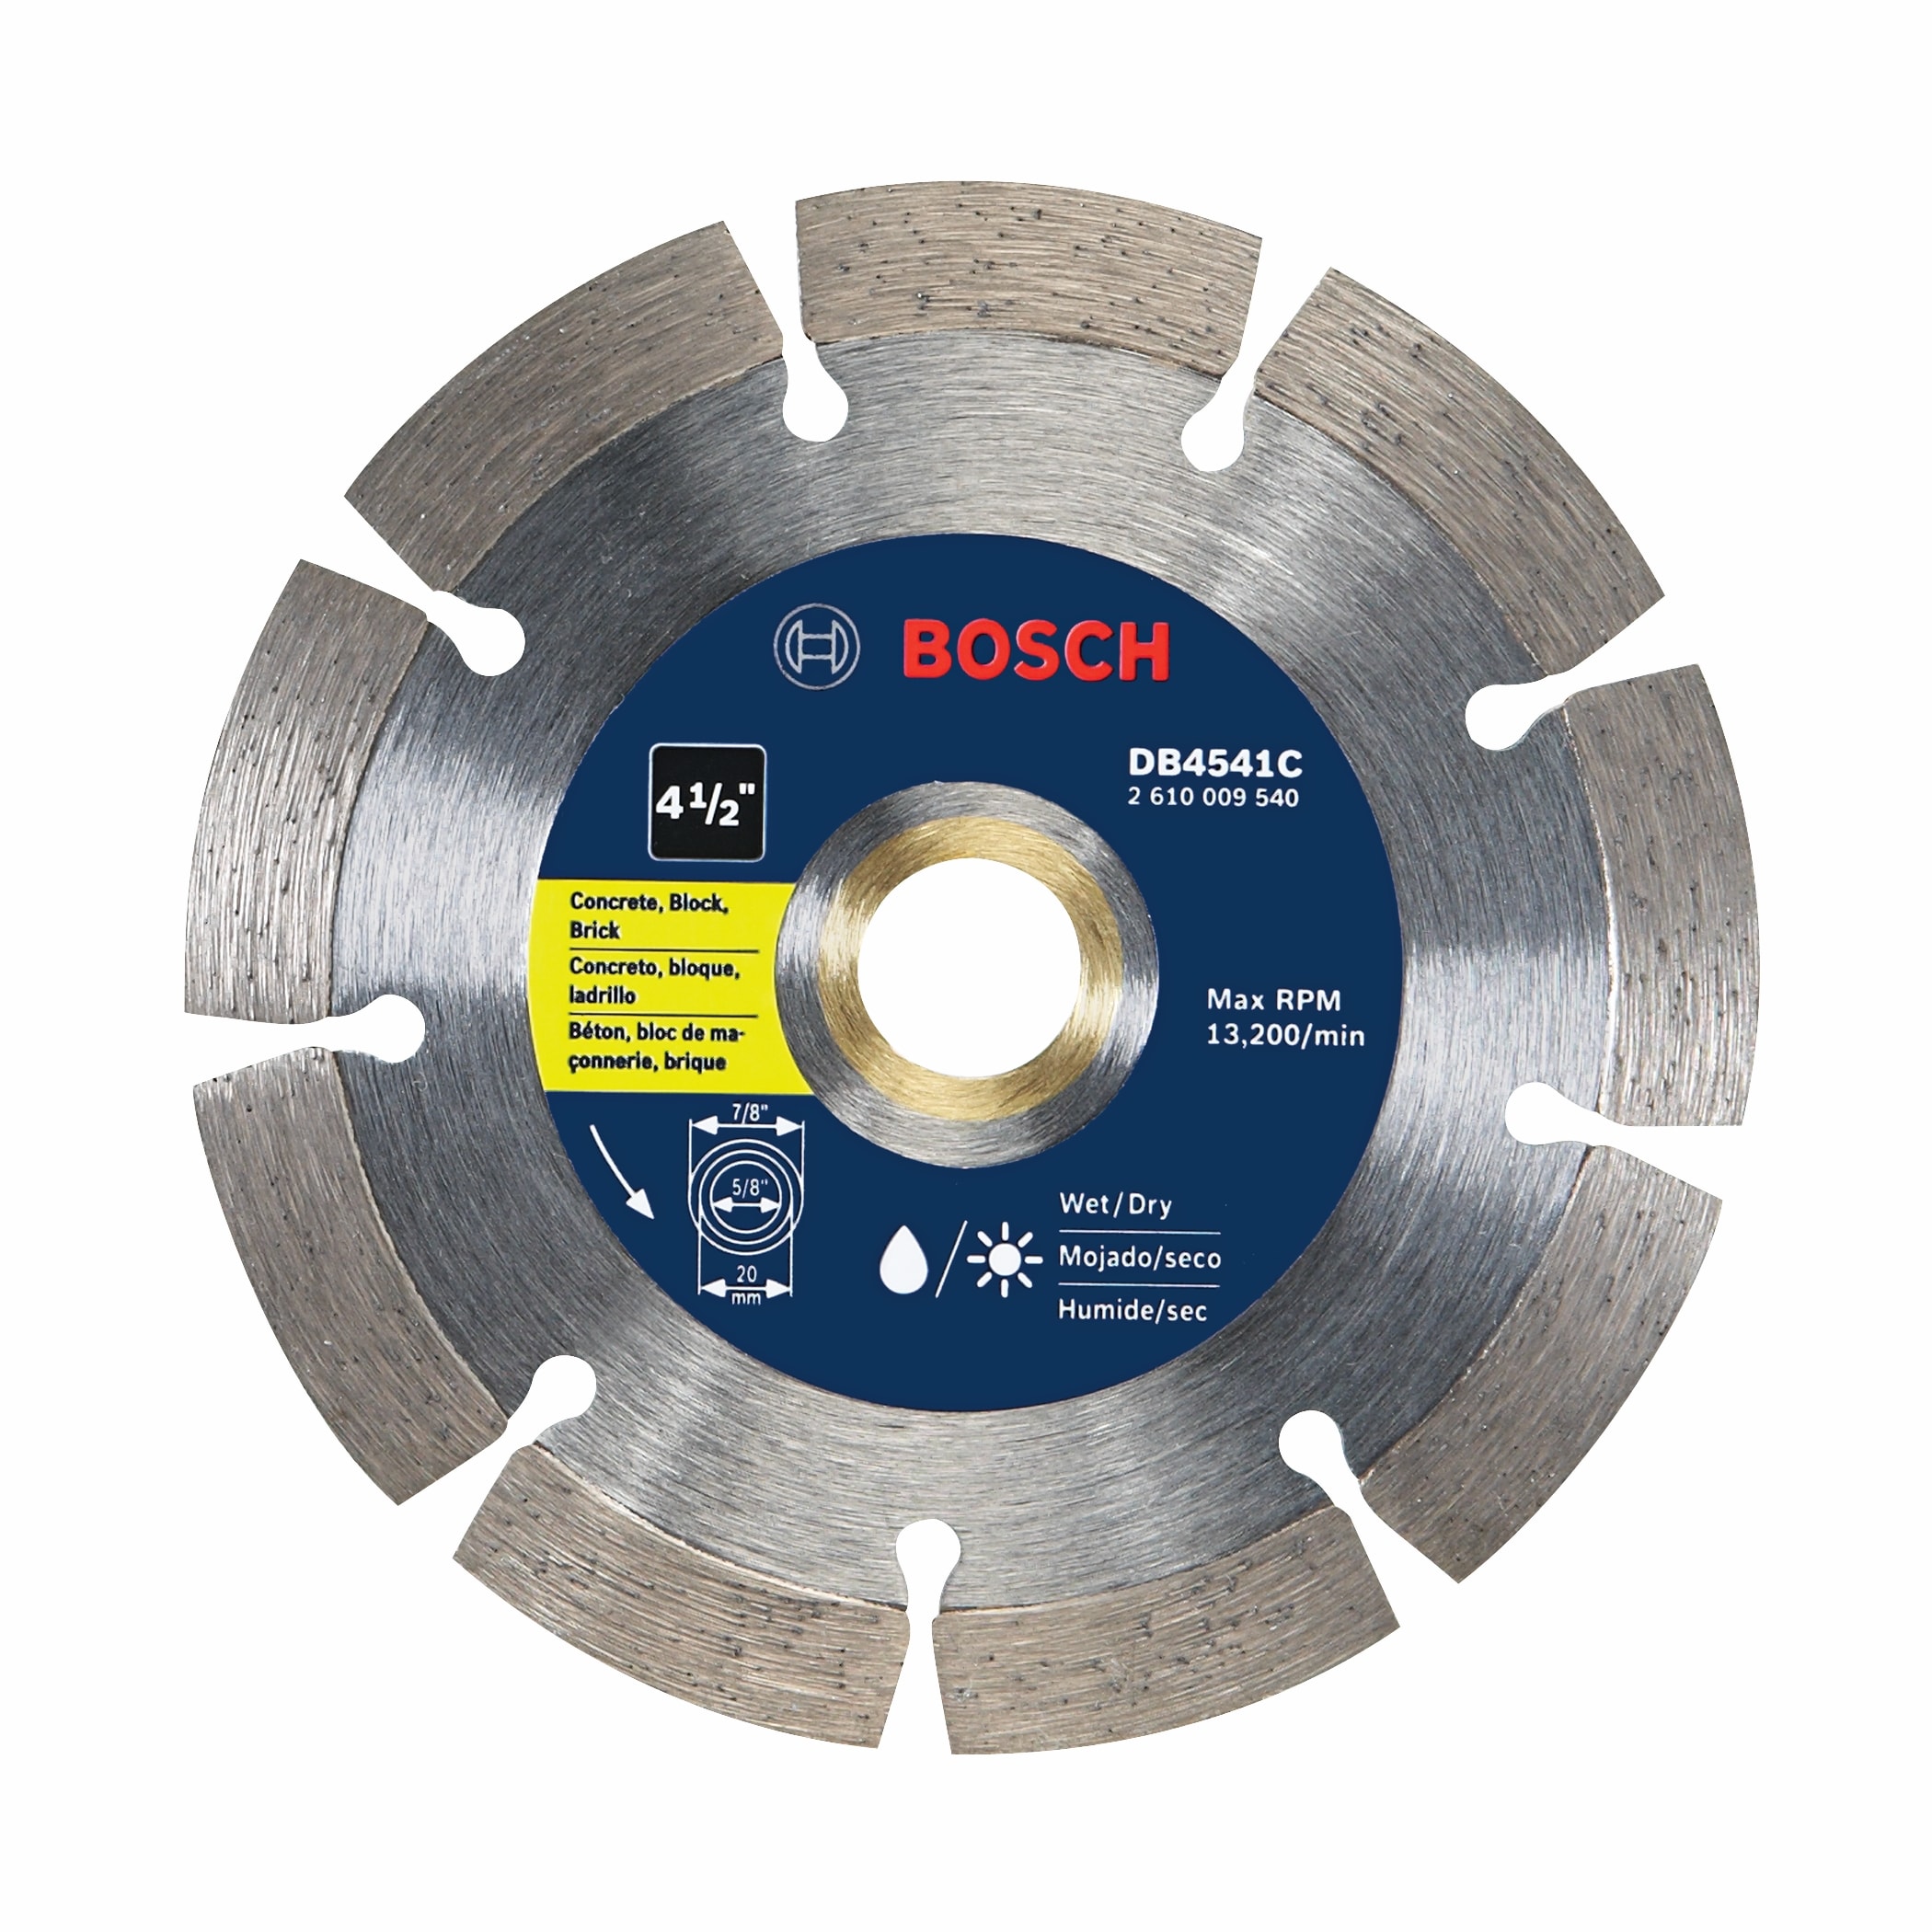 stone and masonry 5-PACK 4 inch diamond blades for cutting tiles porcelain 